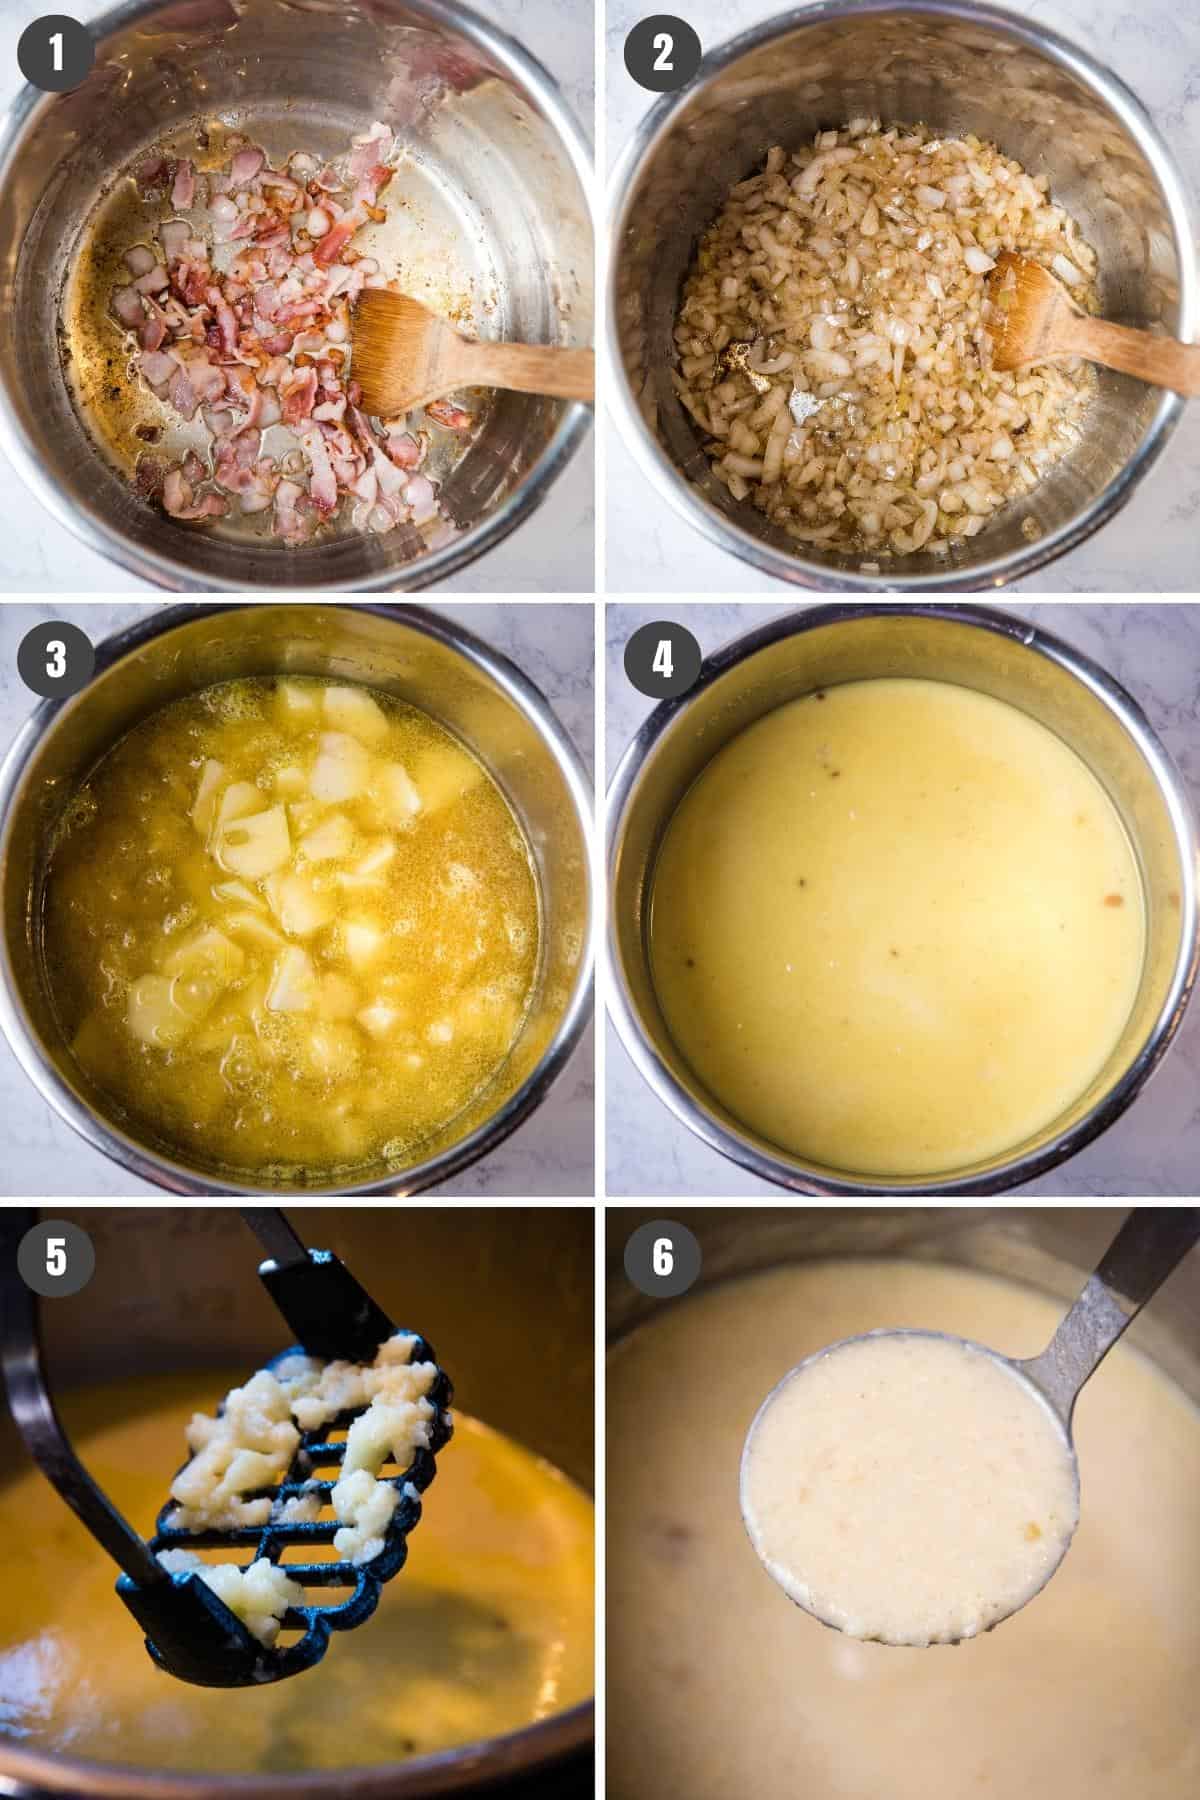 steps for how to make potato soup in Instant Pot, including cooking bacon, onions, potatoes with broth, adding milk and cream, then mashing potatoes and ladling soup